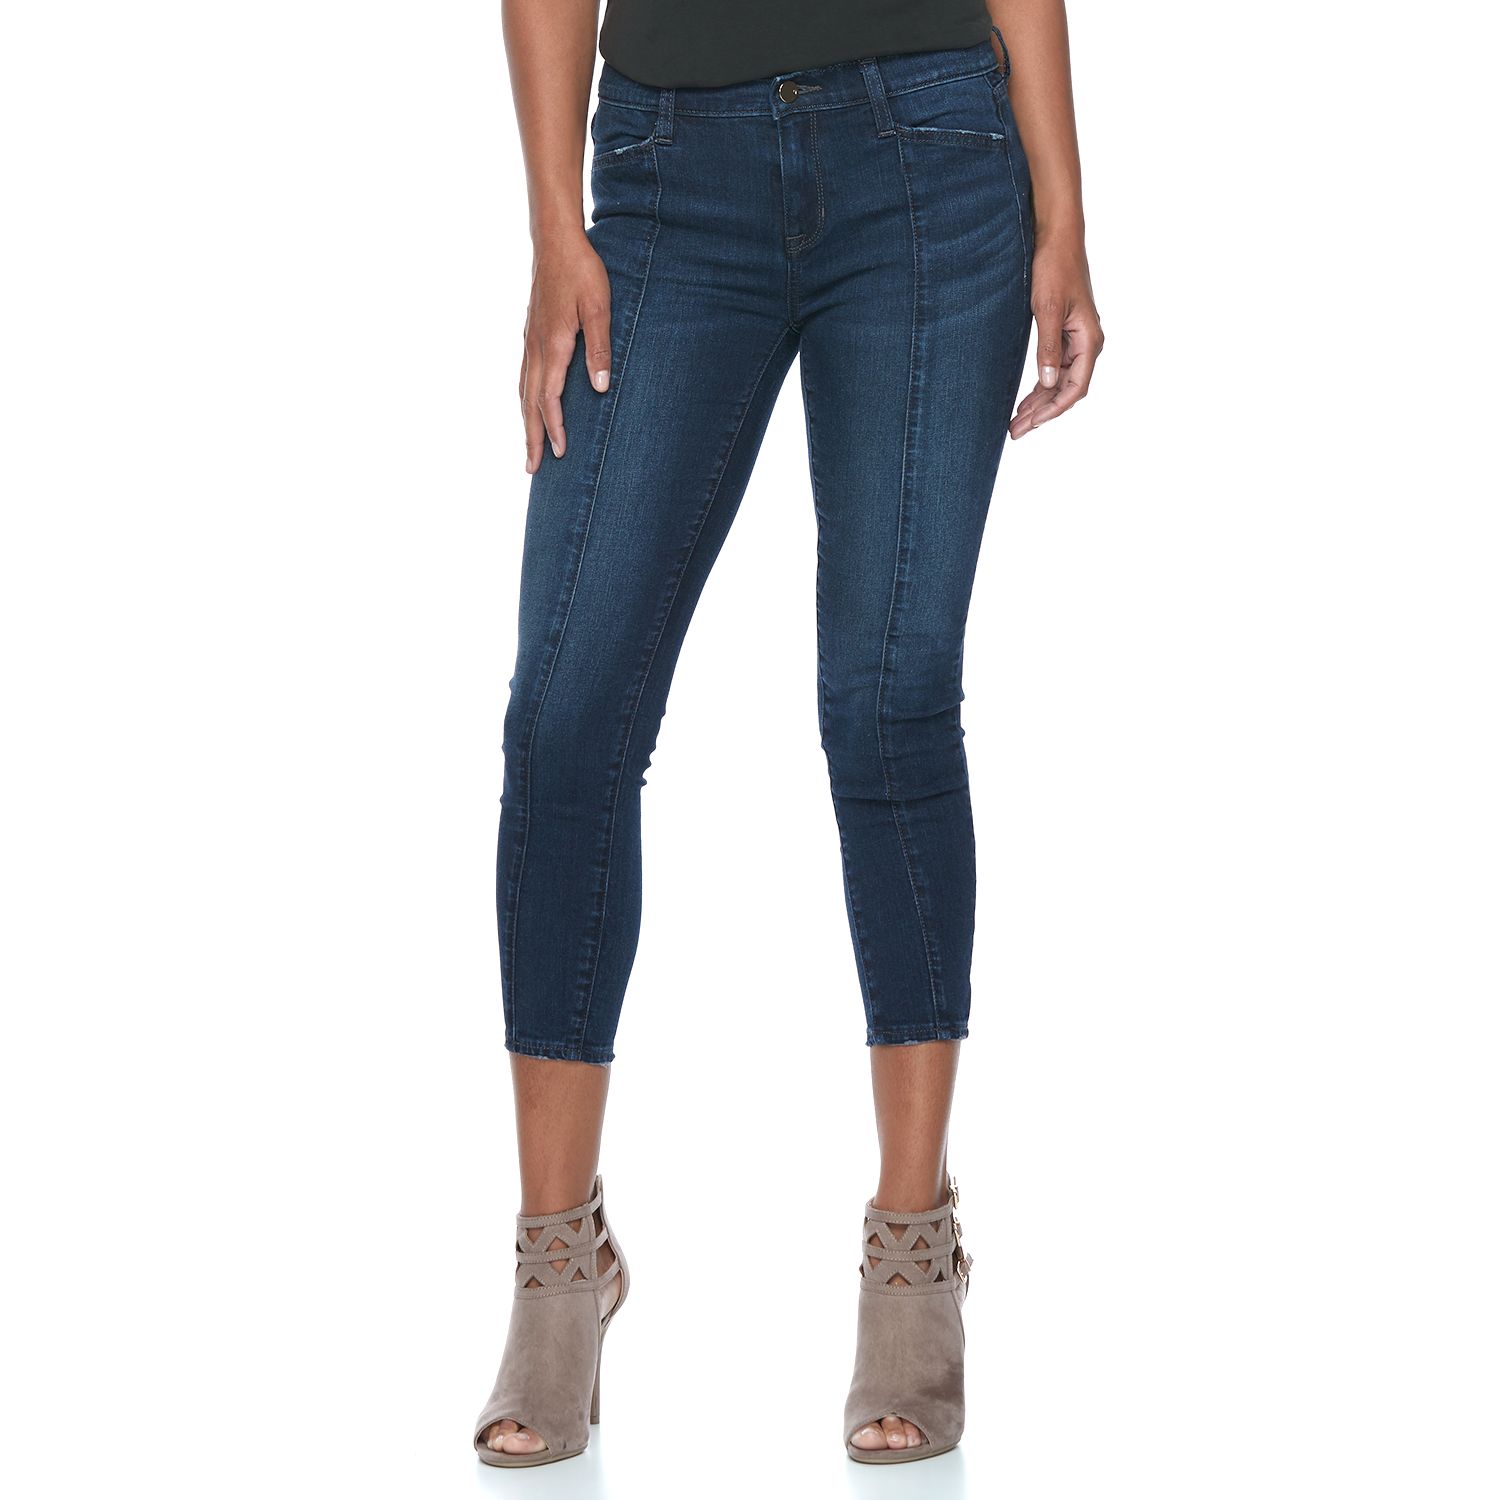 wrangler thinsulate lined jeans